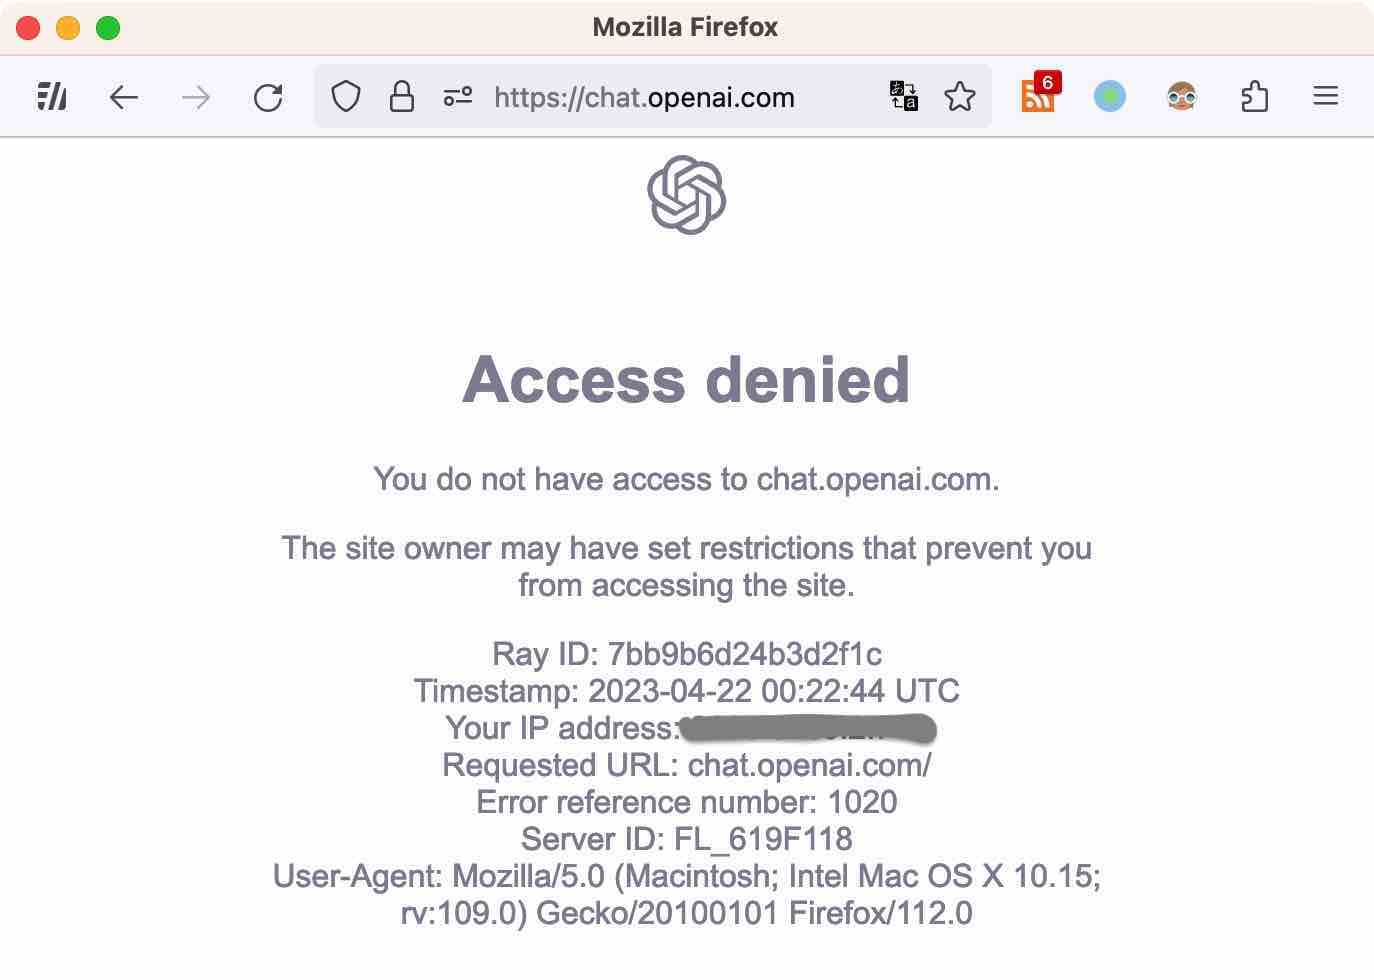 Access denied - You do not have access to chat.openai.com.